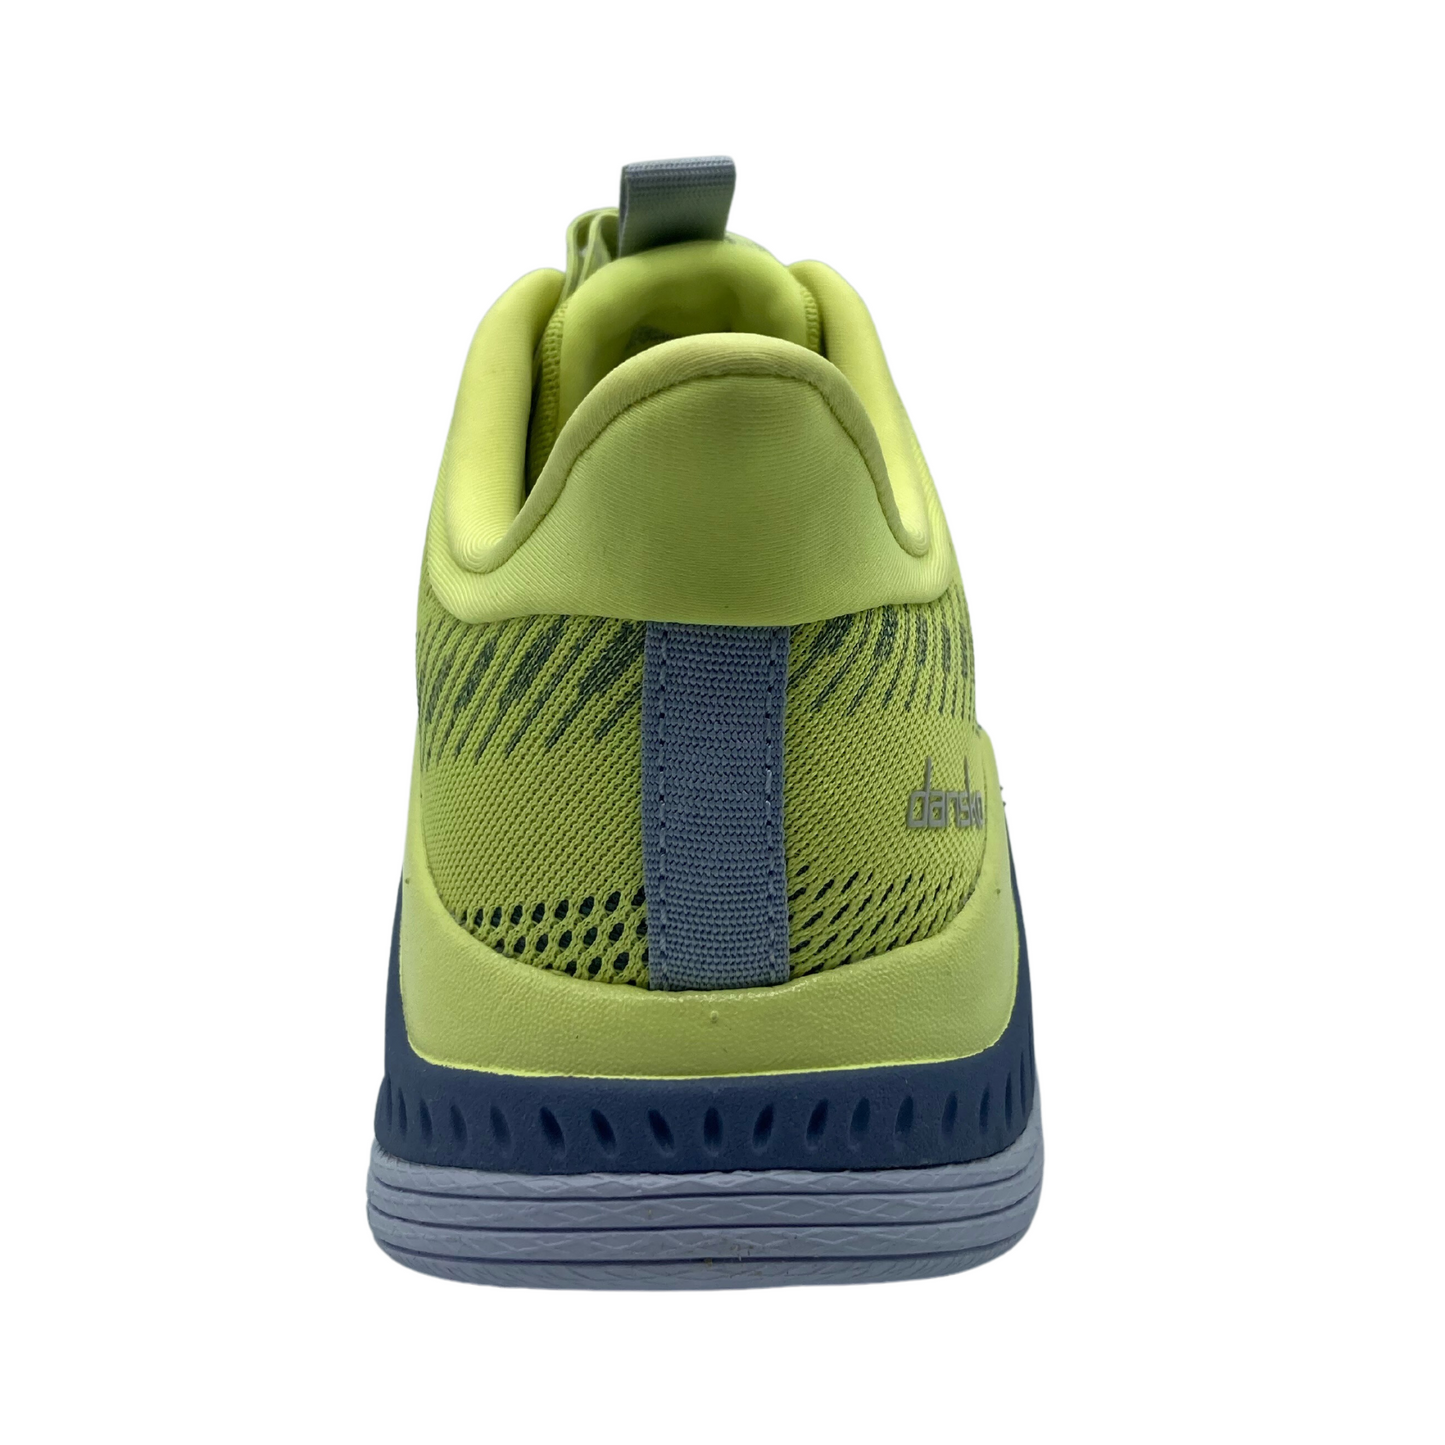 Heel view of yellow mesh sneaker with yellow, blue and grey rubber sole